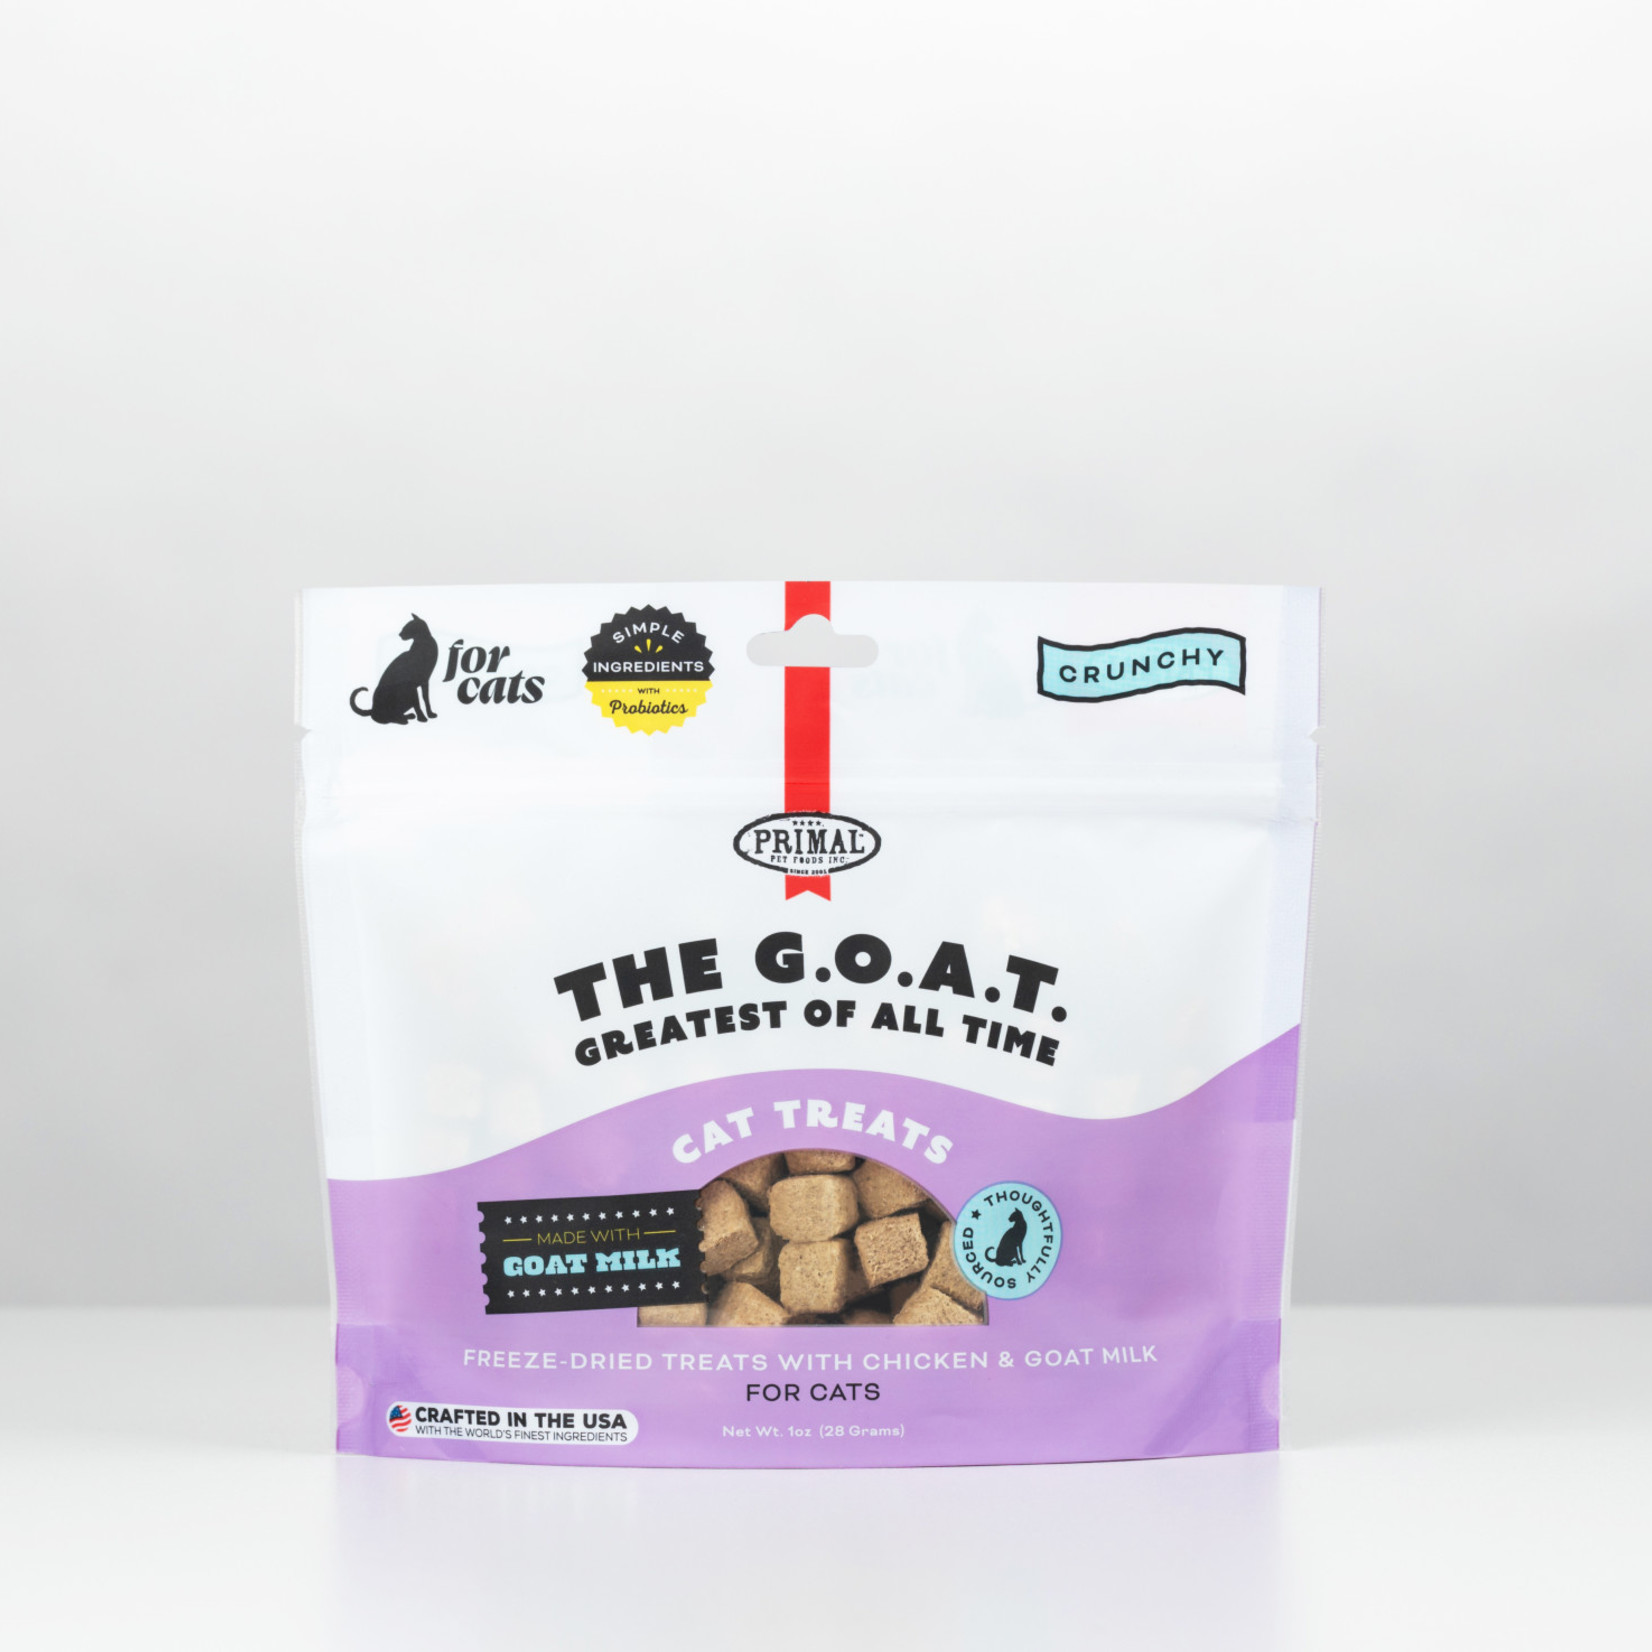 Primal Pet Foods The G.O.A.T. - Chicken & Goat Milk Treats for Cats